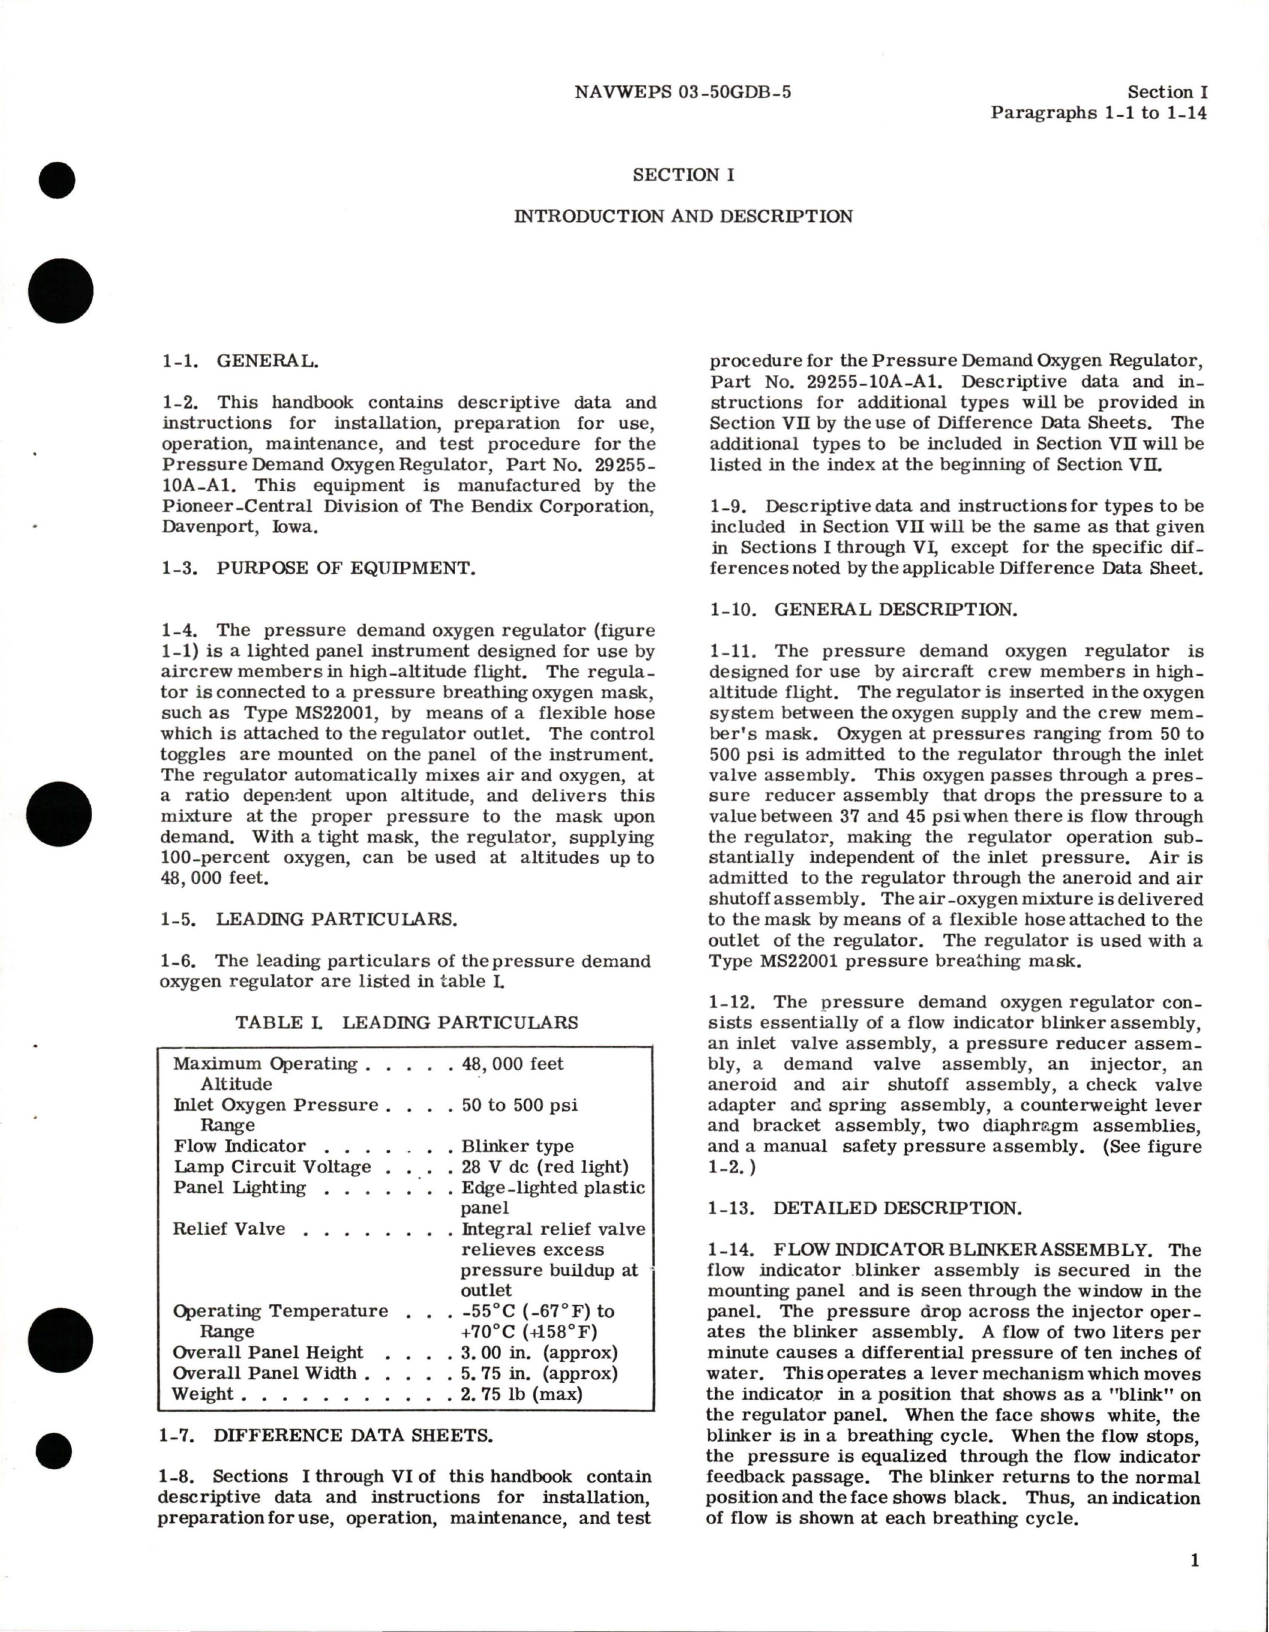 Sample page 5 from AirCorps Library document: Operation and Maintenance Instructions for Pressure Demand Oxygen Regulator - Part 29255-10A-A1